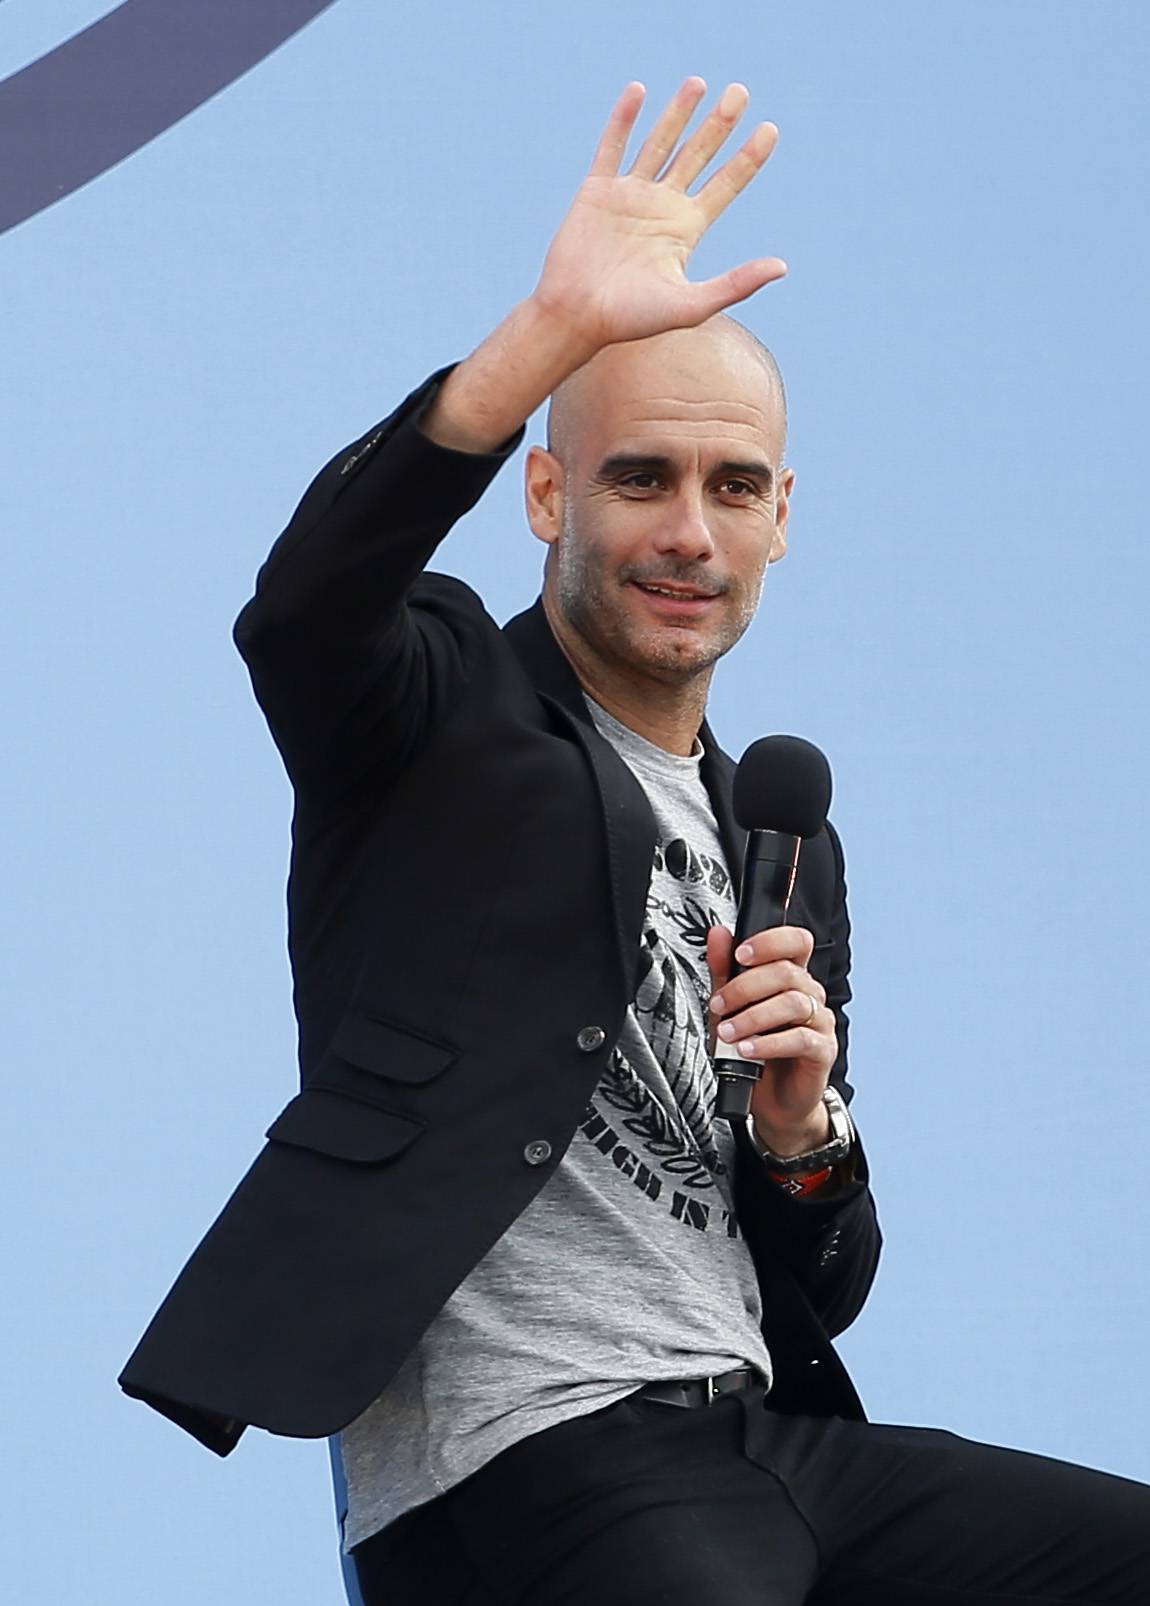 Pep Guardiola presented to Manchester City fans